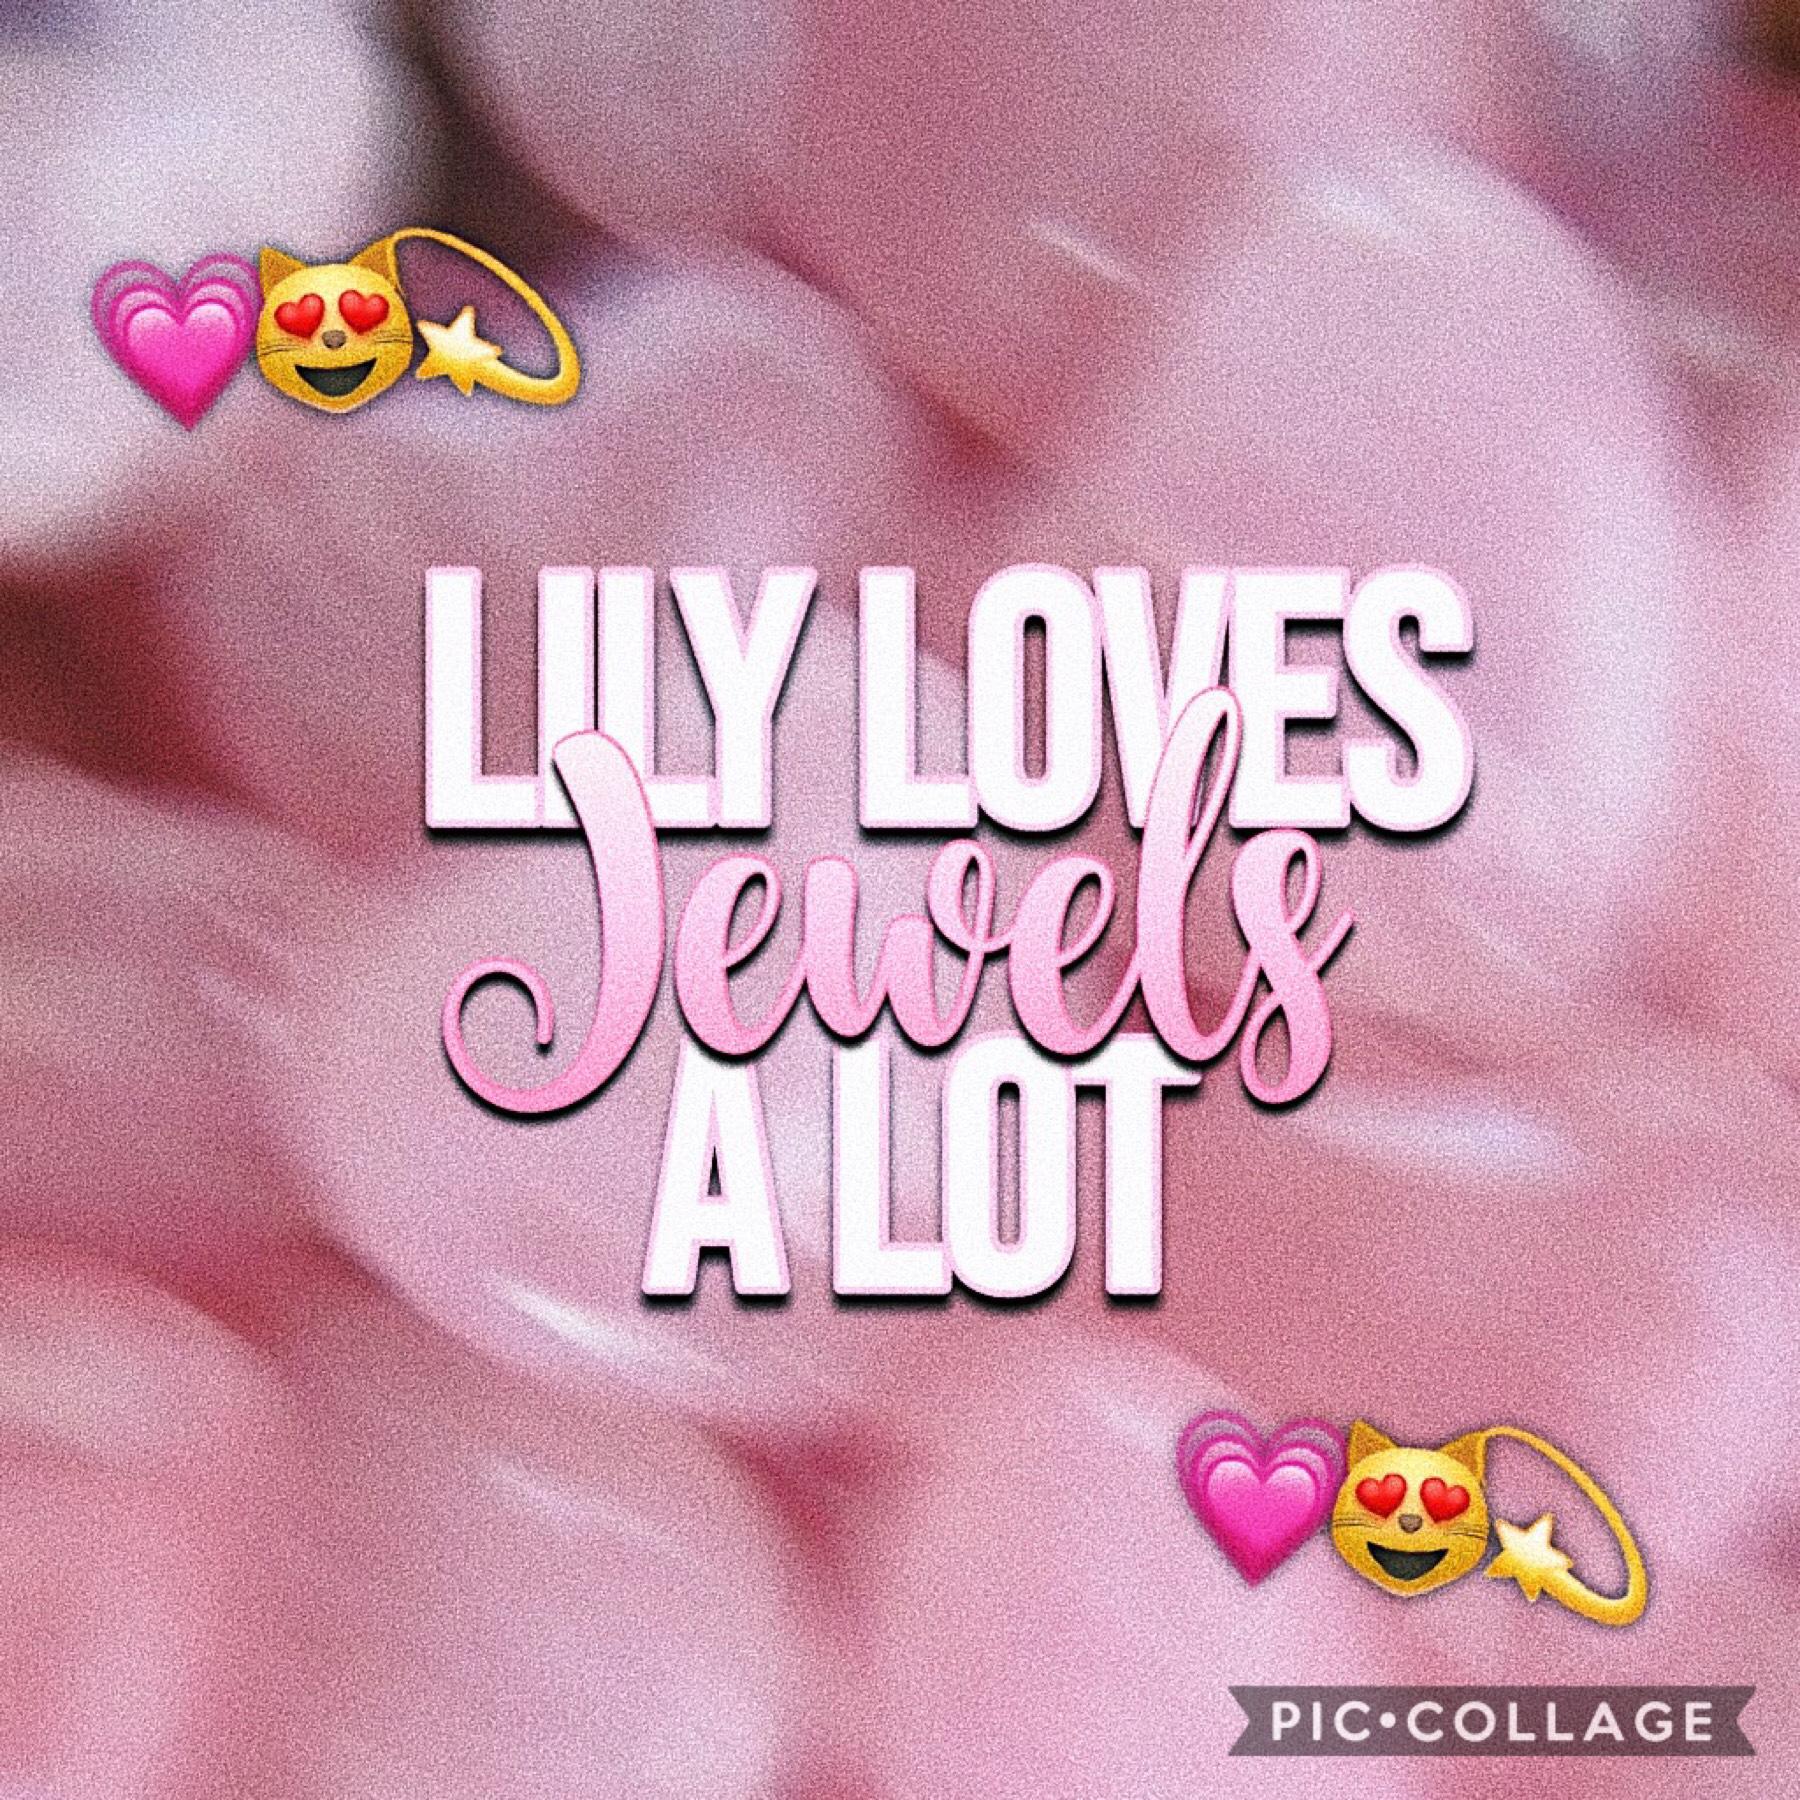 tap
Just a reminder incase you forgot:
Jewels is, beautiful, kind, funny, sweet, overall AmAziNg
Also she’s talented! Go follow her @HawkinsEggos ;)
She never fails to brighten my day and always make me feel better. I’m so lucky to have her 💗